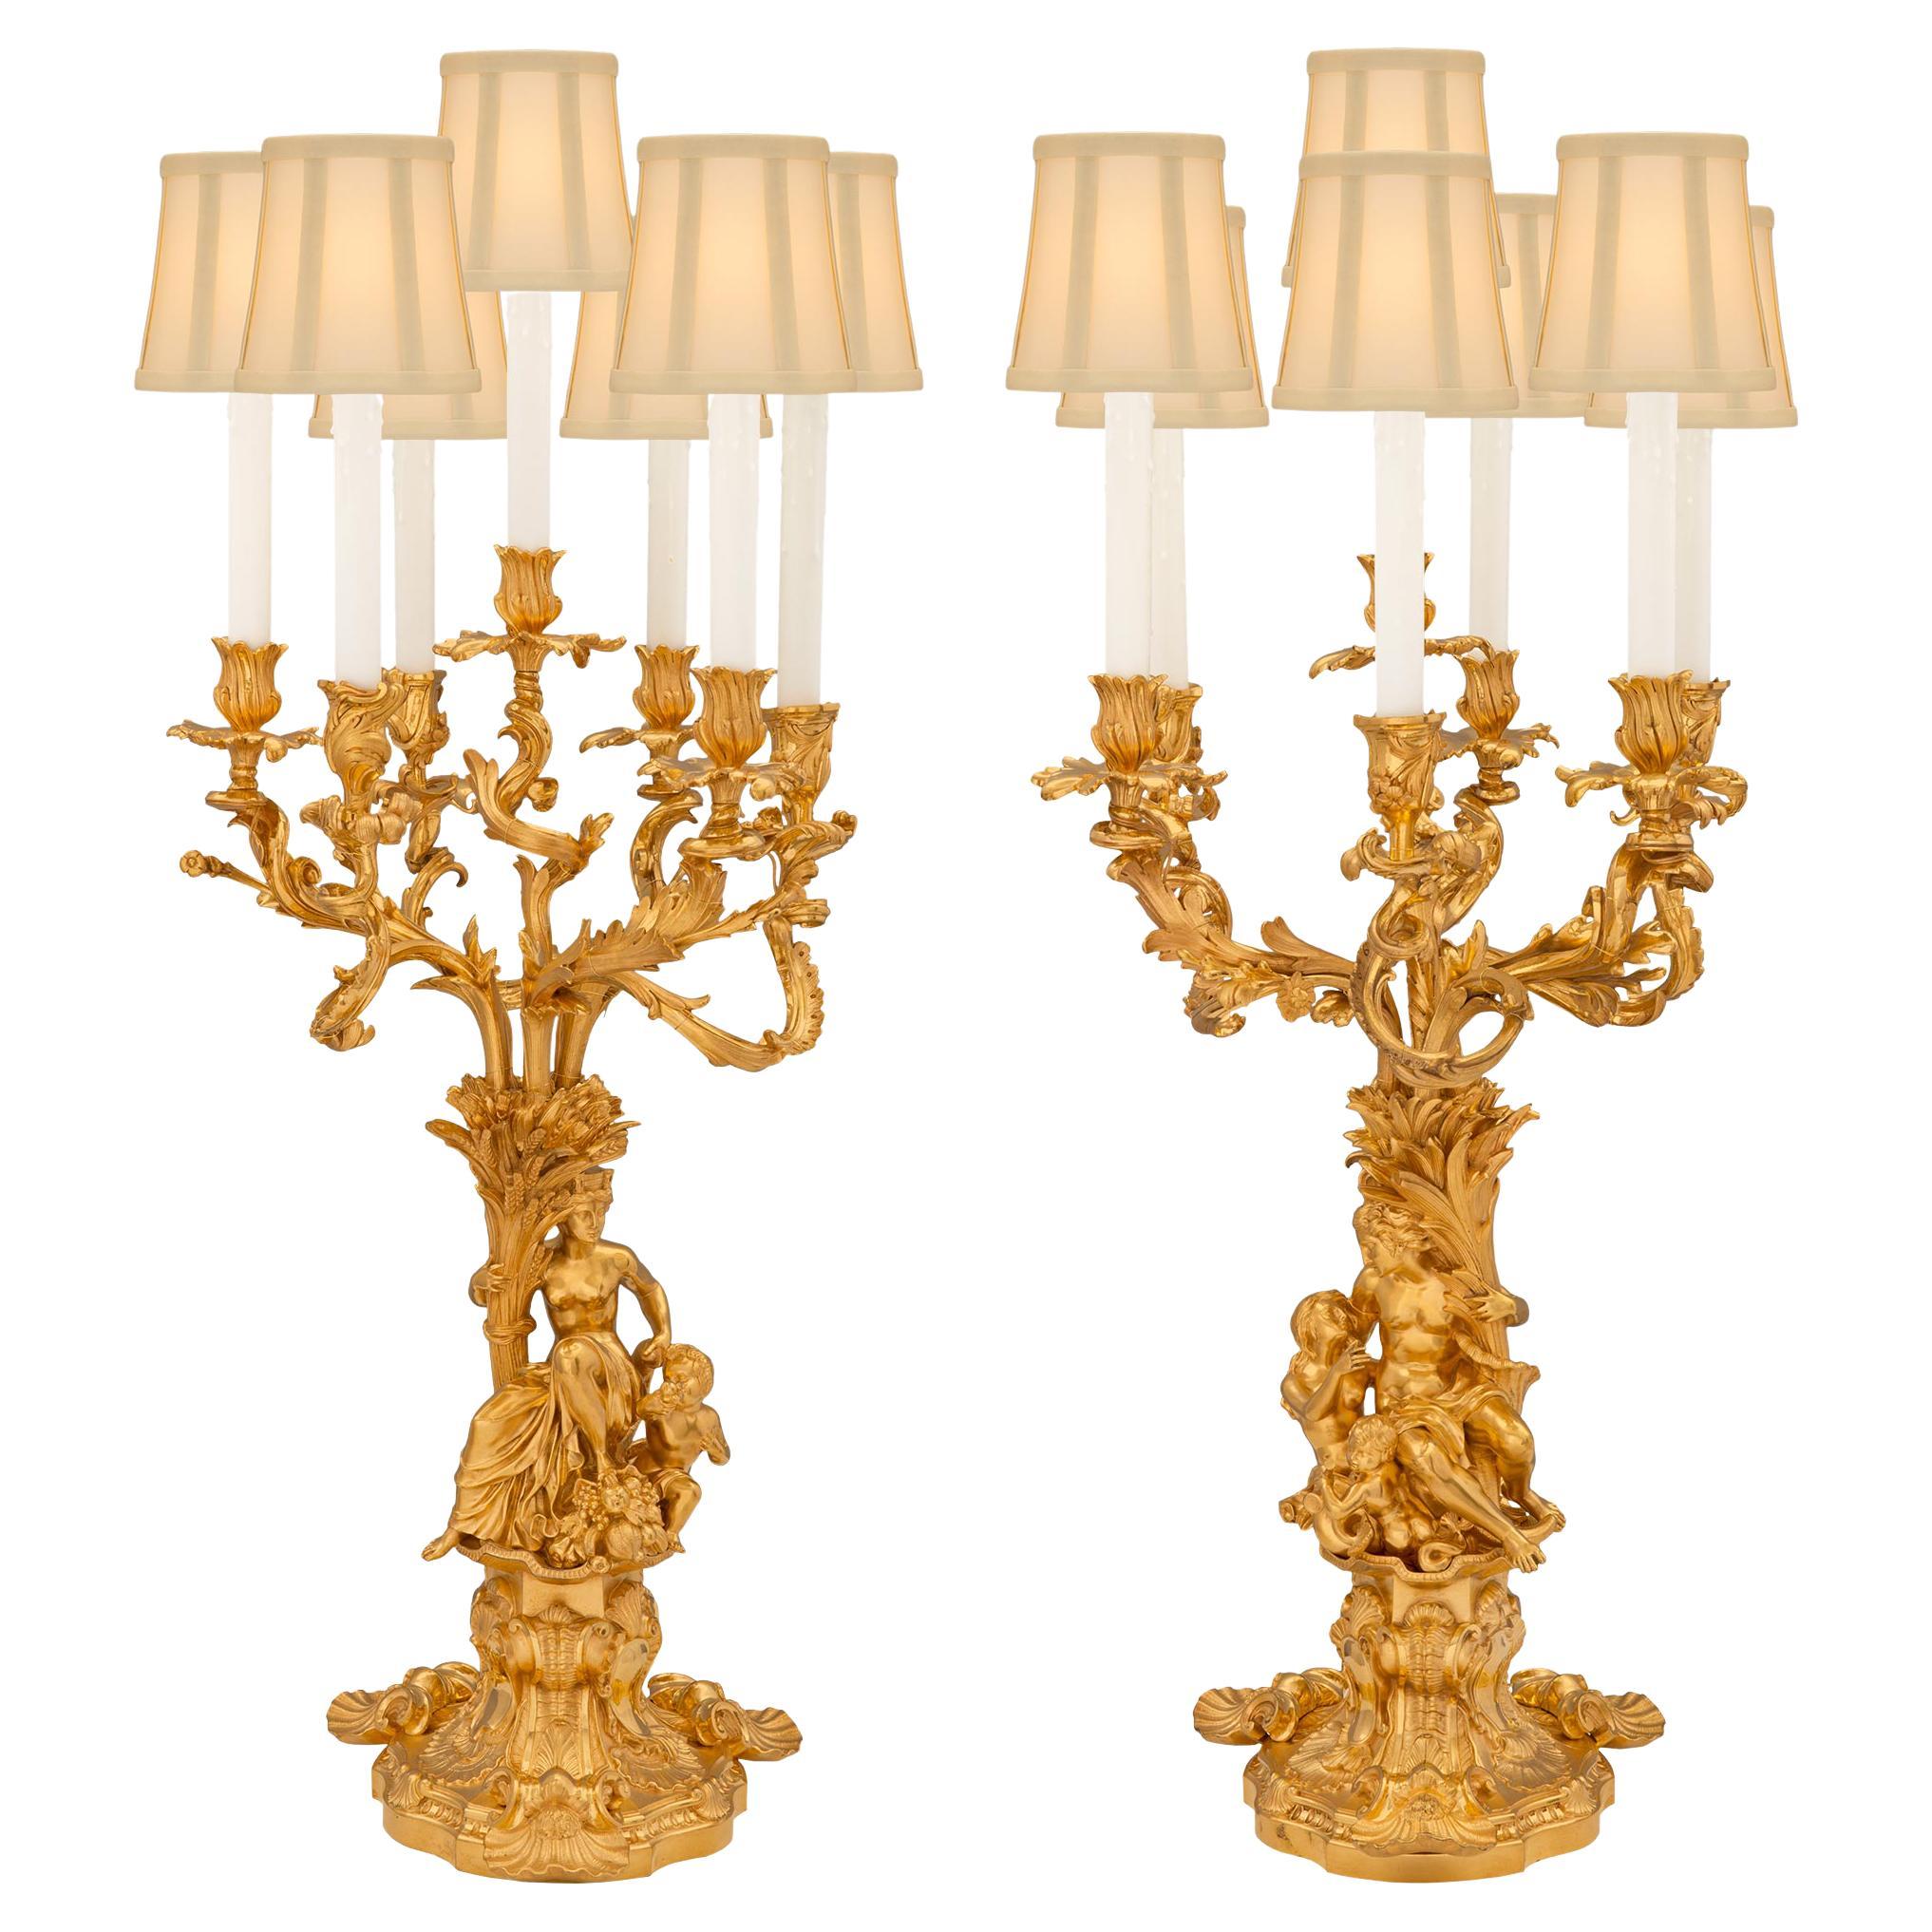 Pair of Large Scale French 19th Century Louis XV St. Ormolu Candelabra Lamps For Sale